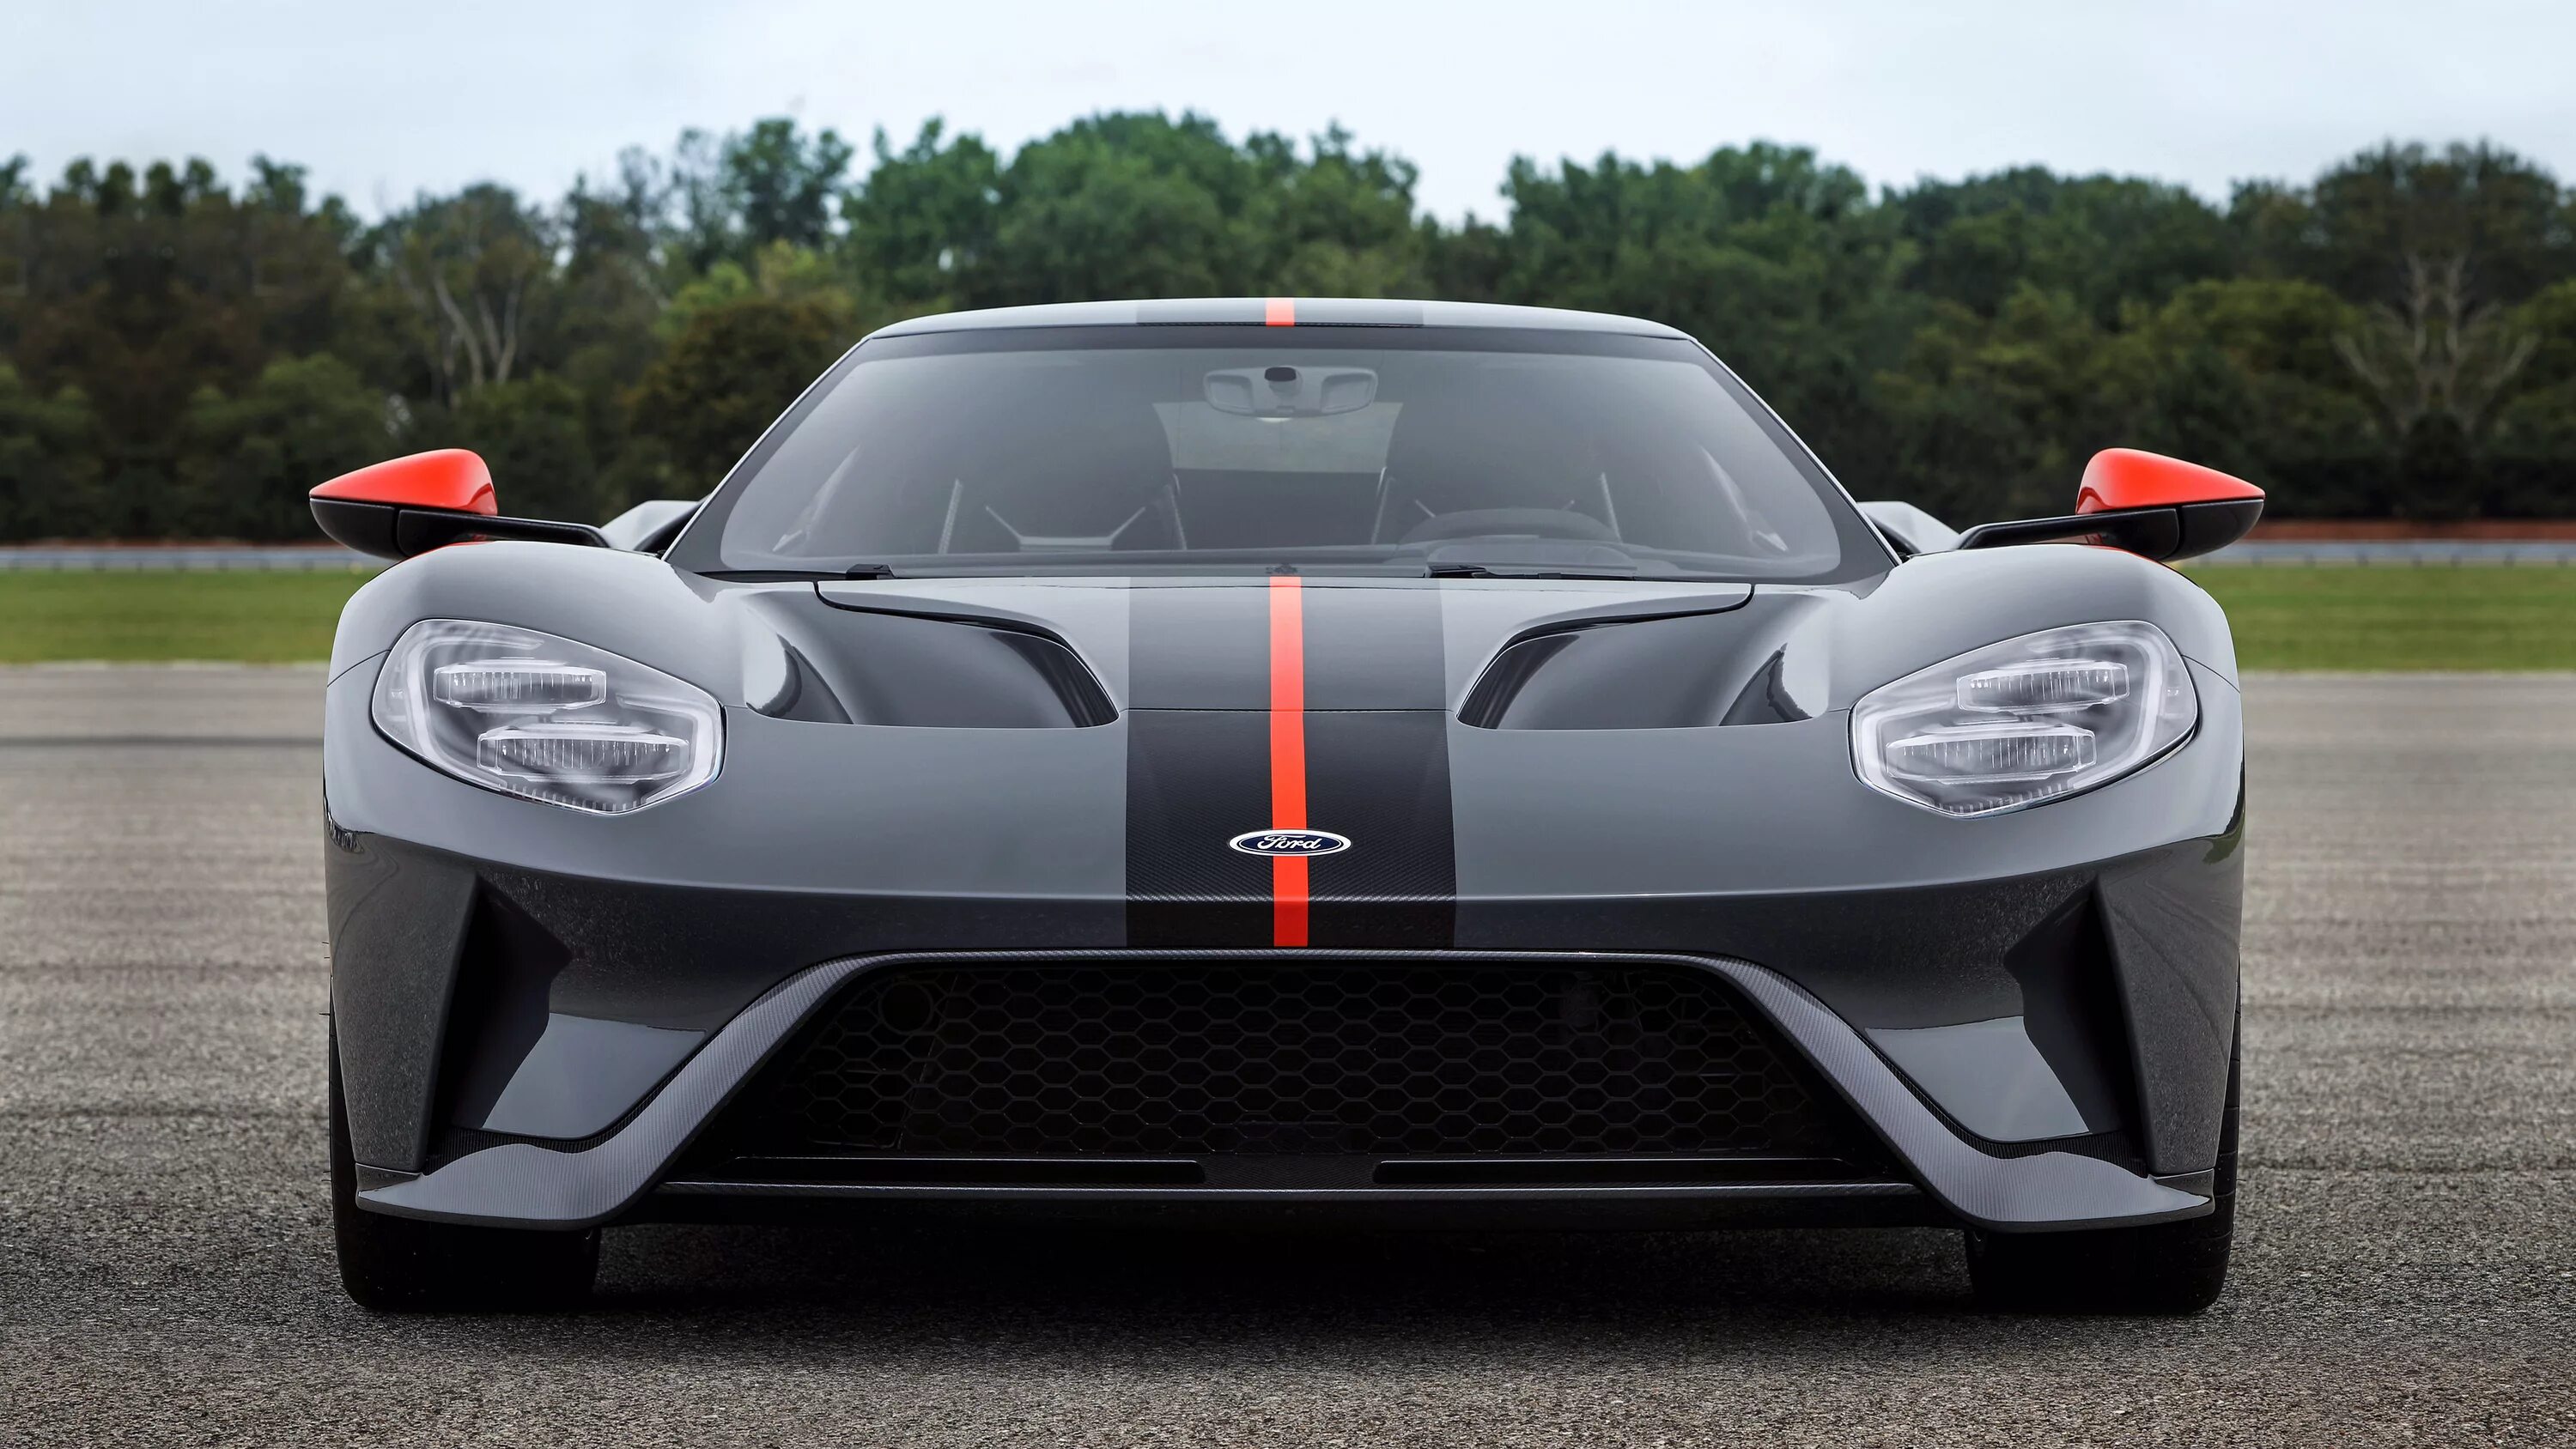 Super car. Форд ГТ 2019. Ford gt Carbon Series. Ford gt 2010. Ford gt40 Carbon.